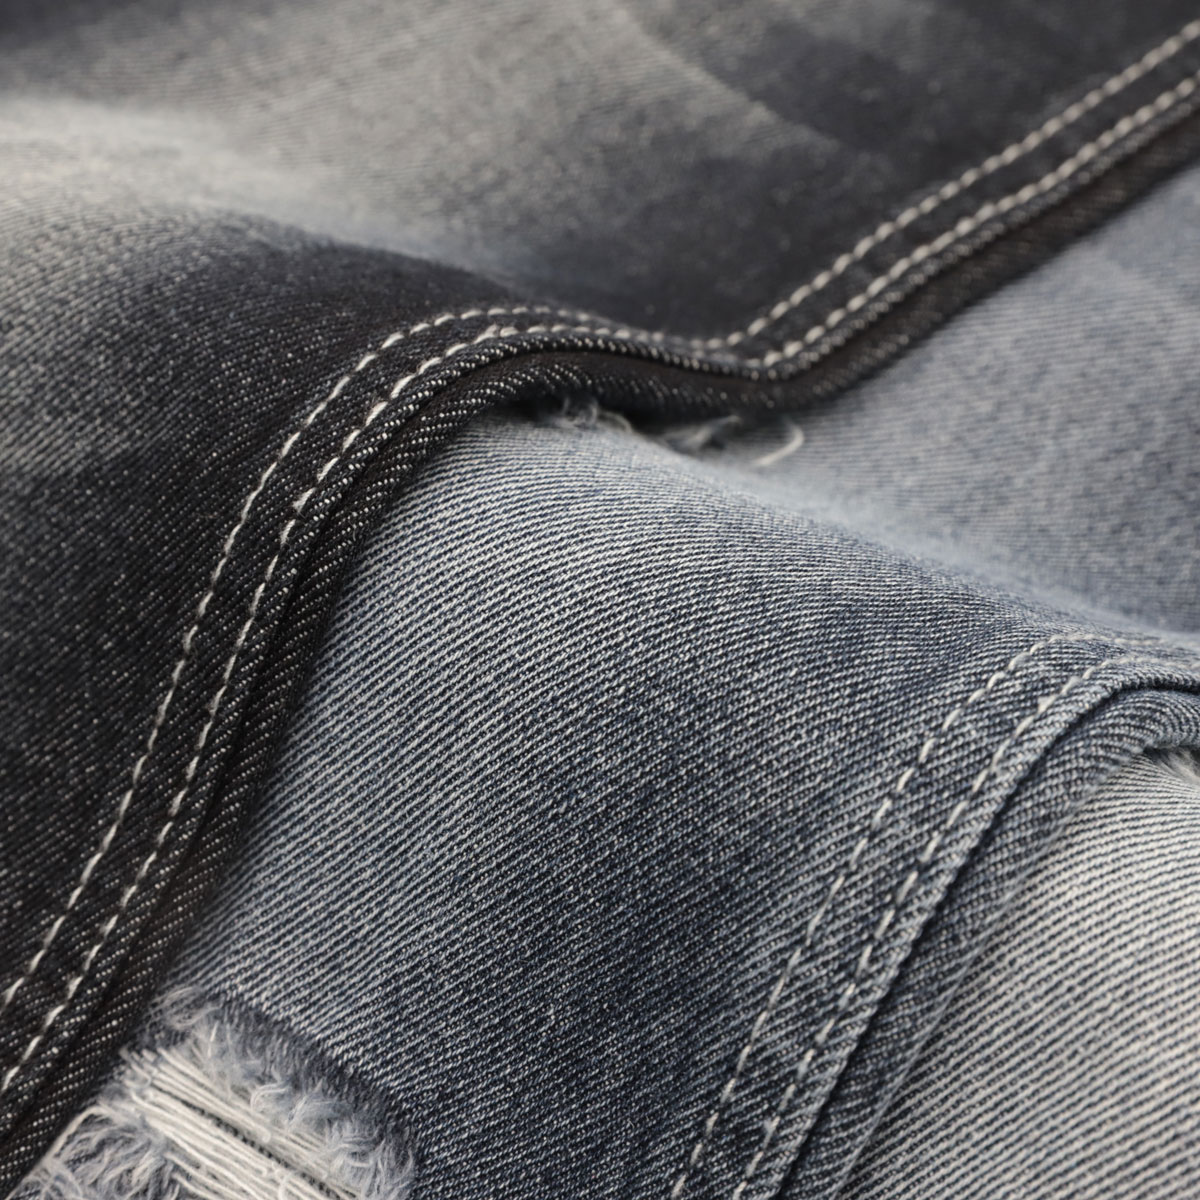 How to Care for Denim Textile Manufacturers 1